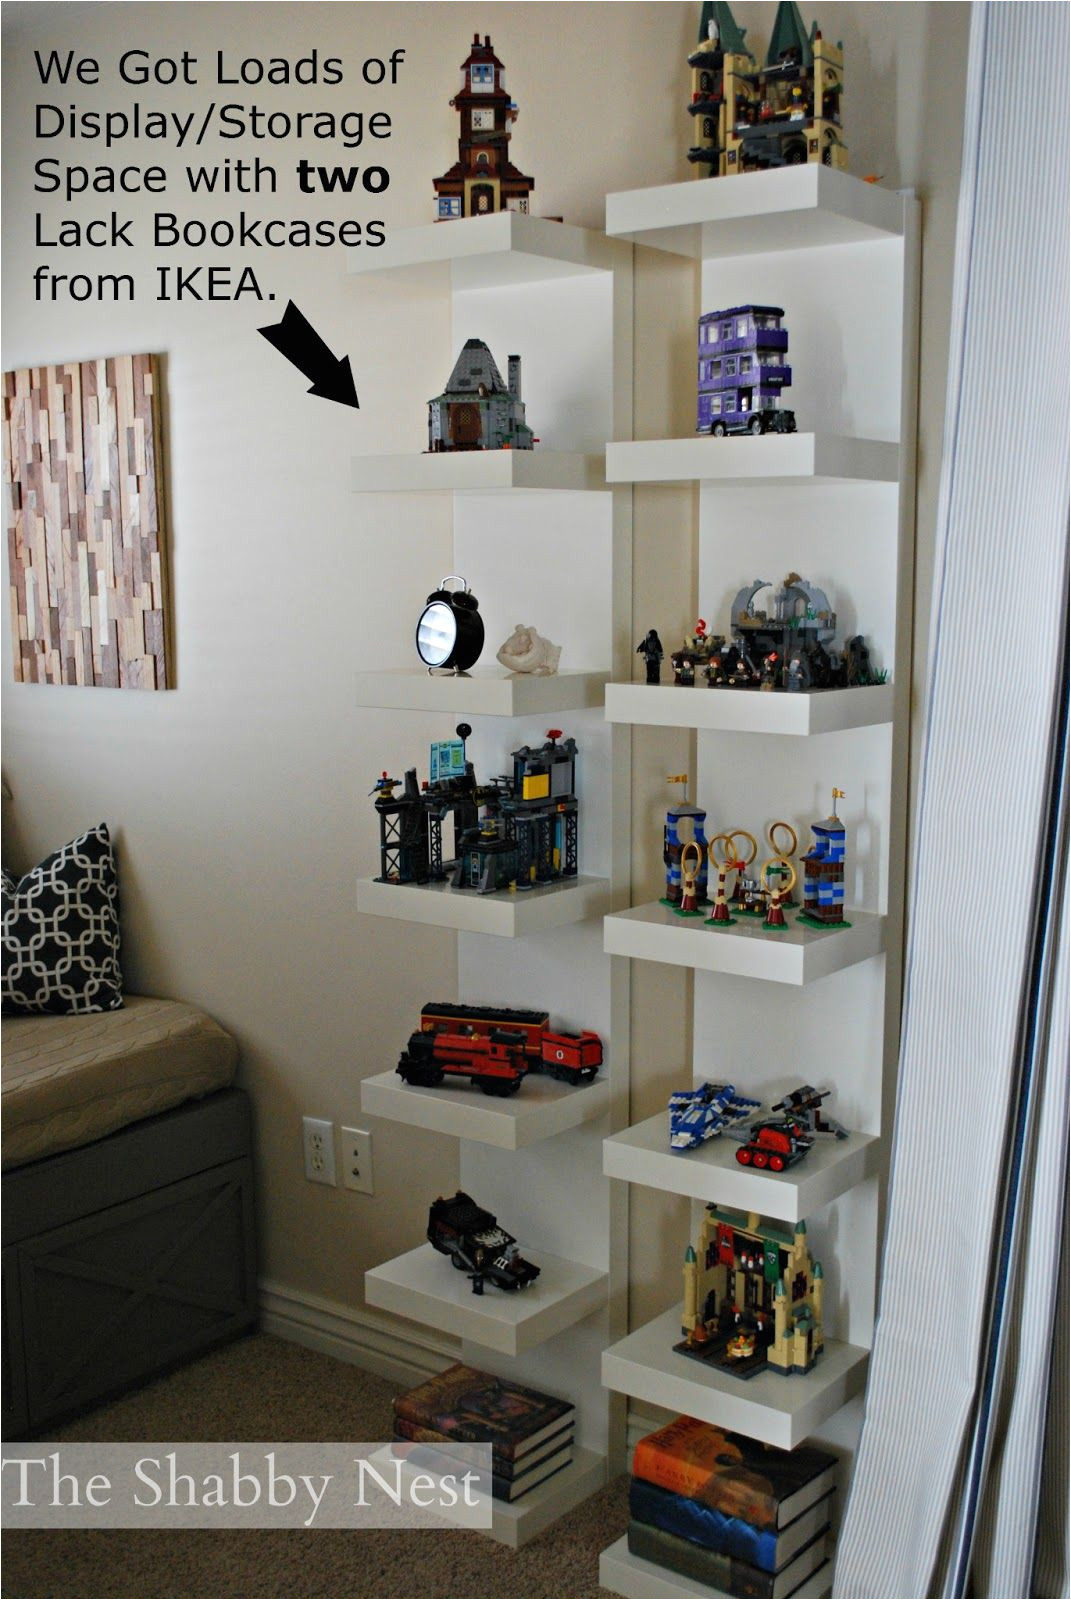 display lego collection we used lack bookcases ikea to display boy one s collection